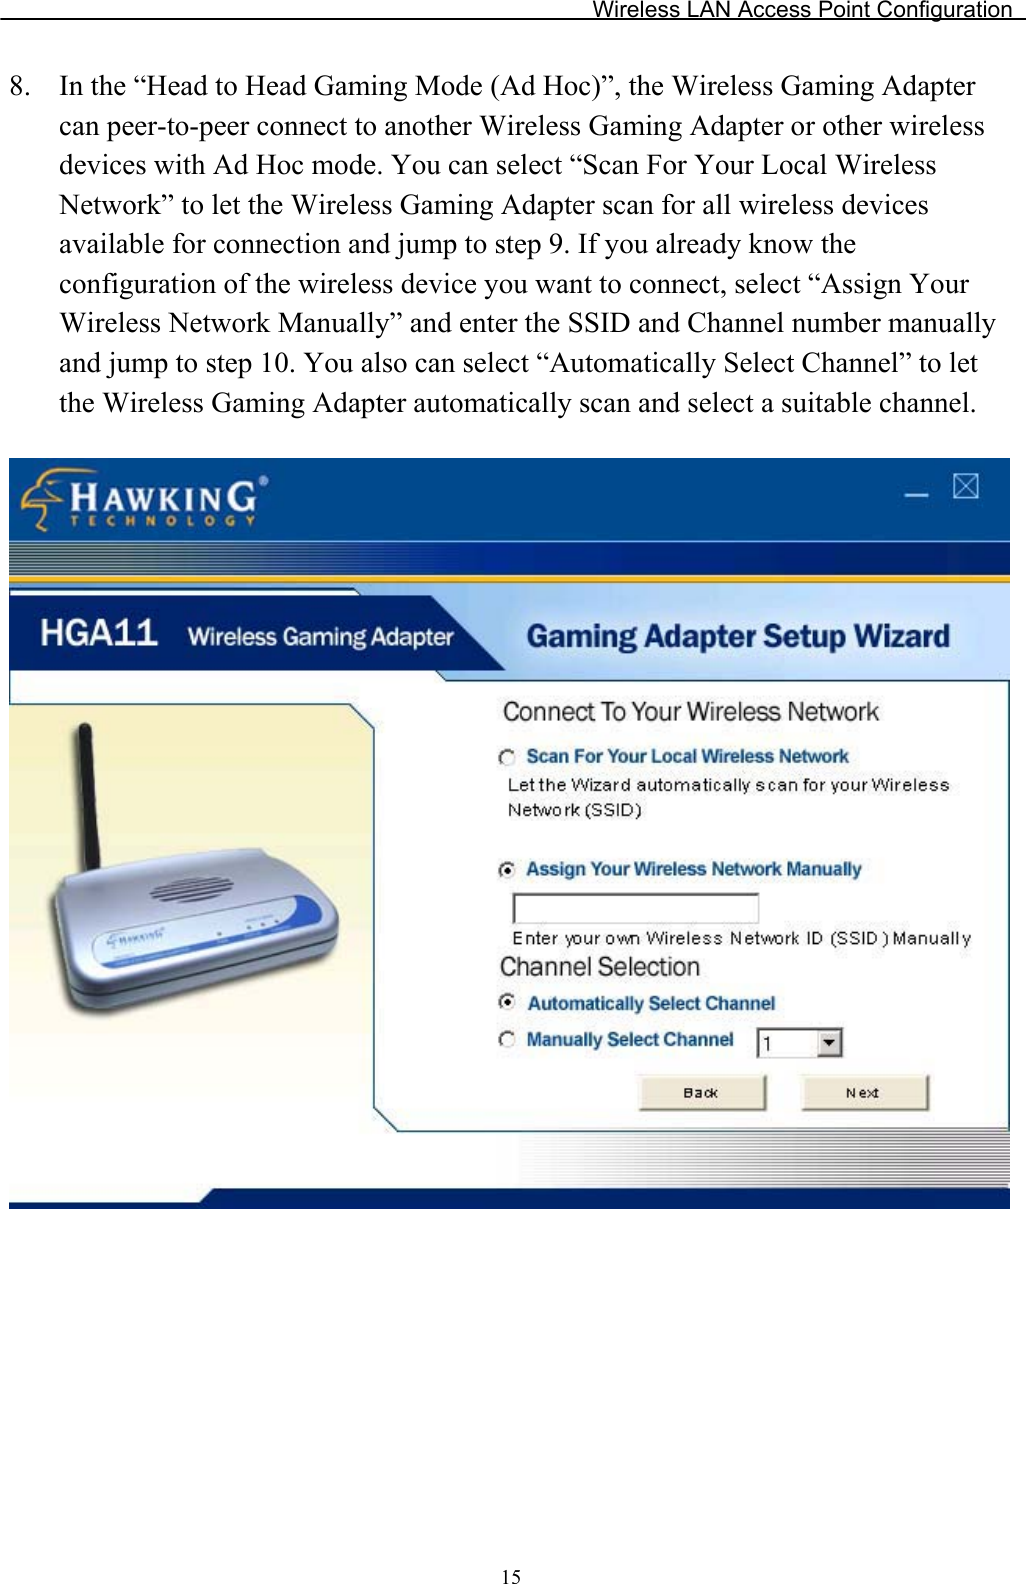 Wireless LAN Access Point Configuration 8. In the “Head to Head Gaming Mode (Ad Hoc)”, the Wireless Gaming Adapter can peer-to-peer connect to another Wireless Gaming Adapter or other wireless devices with Ad Hoc mode. You can select “Scan For Your Local Wireless Network” to let the Wireless Gaming Adapter scan for all wireless devices available for connection and jump to step 9. If you already know the configuration of the wireless device you want to connect, select “Assign Your Wireless Network Manually” and enter the SSID and Channel number manuallyand jump to step 10. You also can select “Automatically Select Channel” to let the Wireless Gaming Adapter automatically scan and select a suitable channel. 15